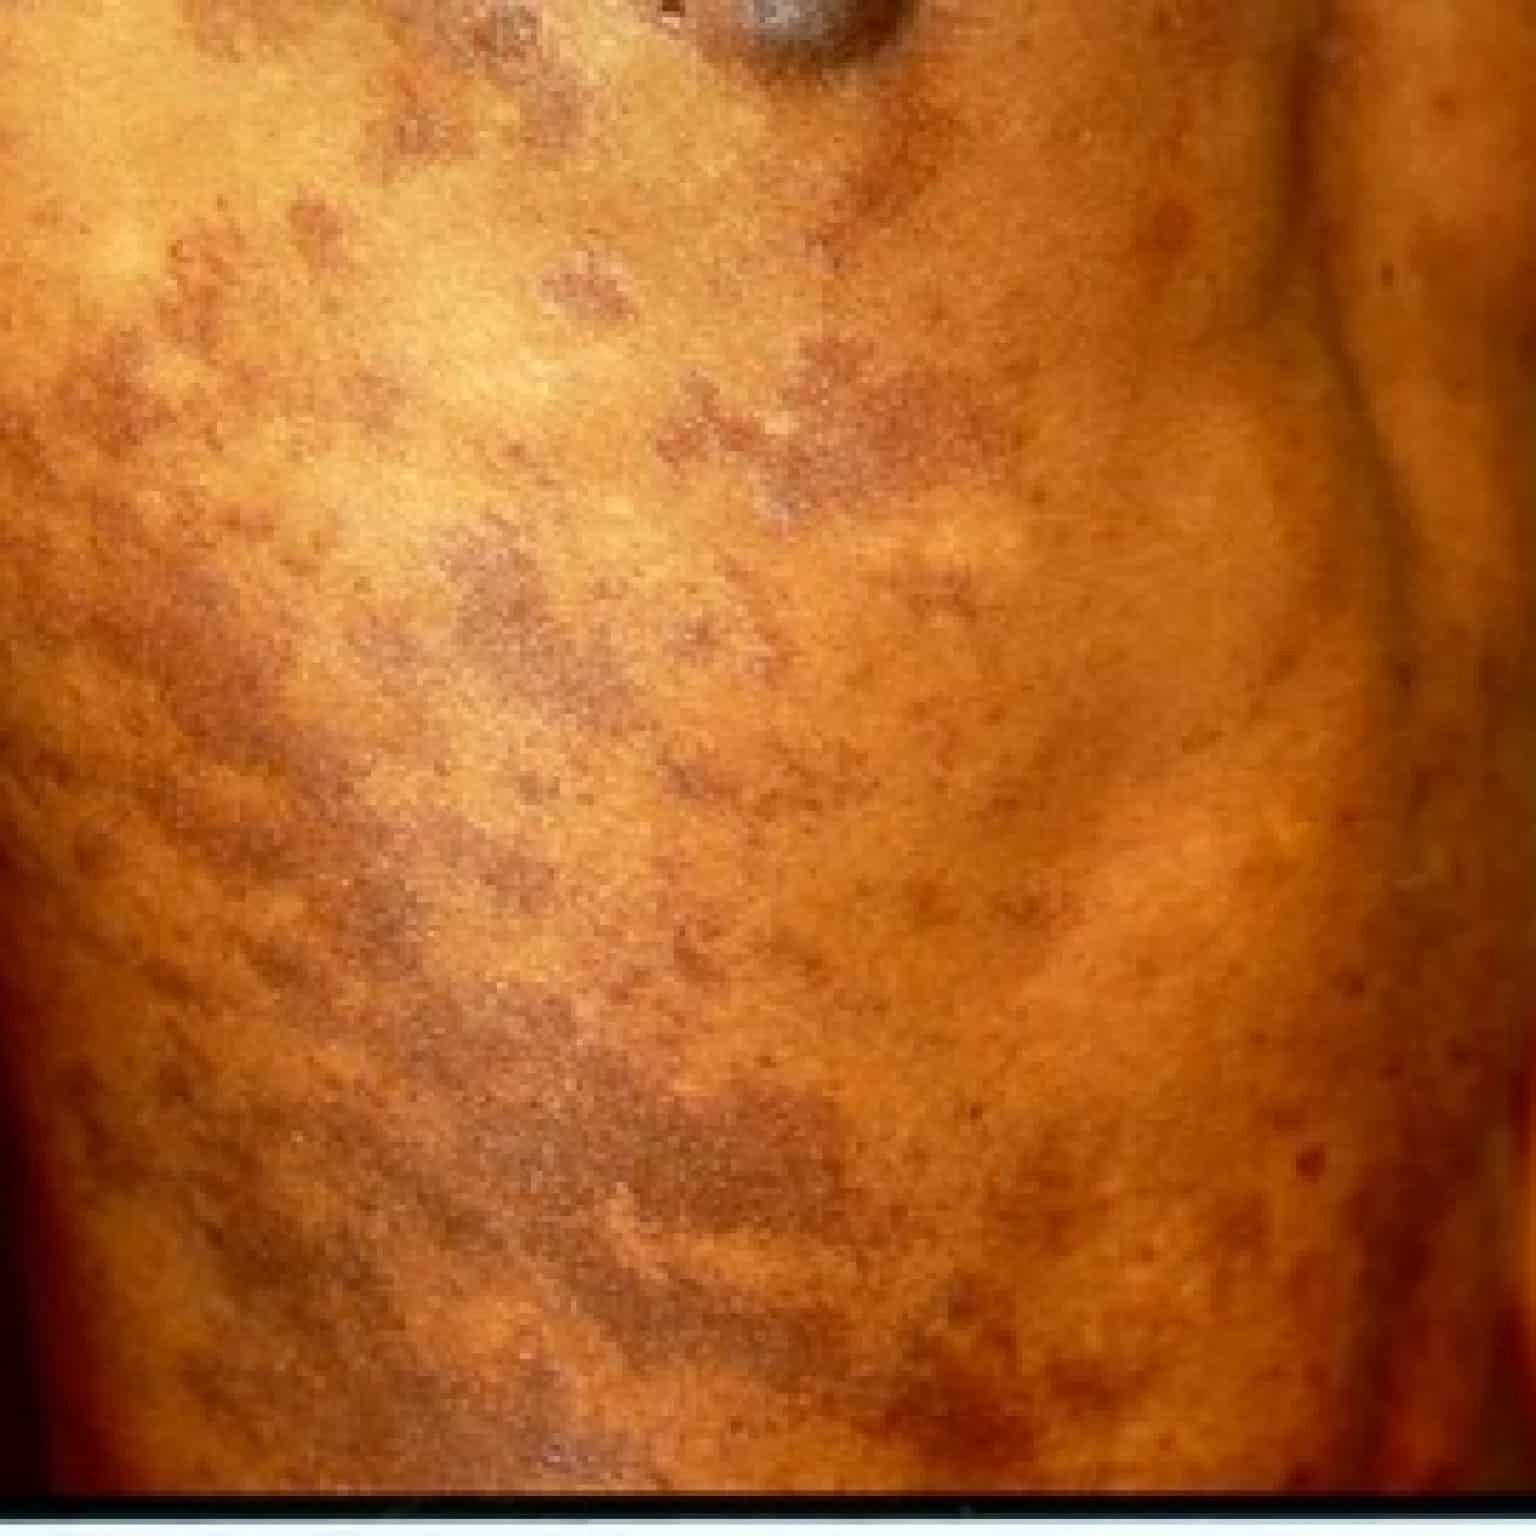 Skin Conditions That Look Like Eczema